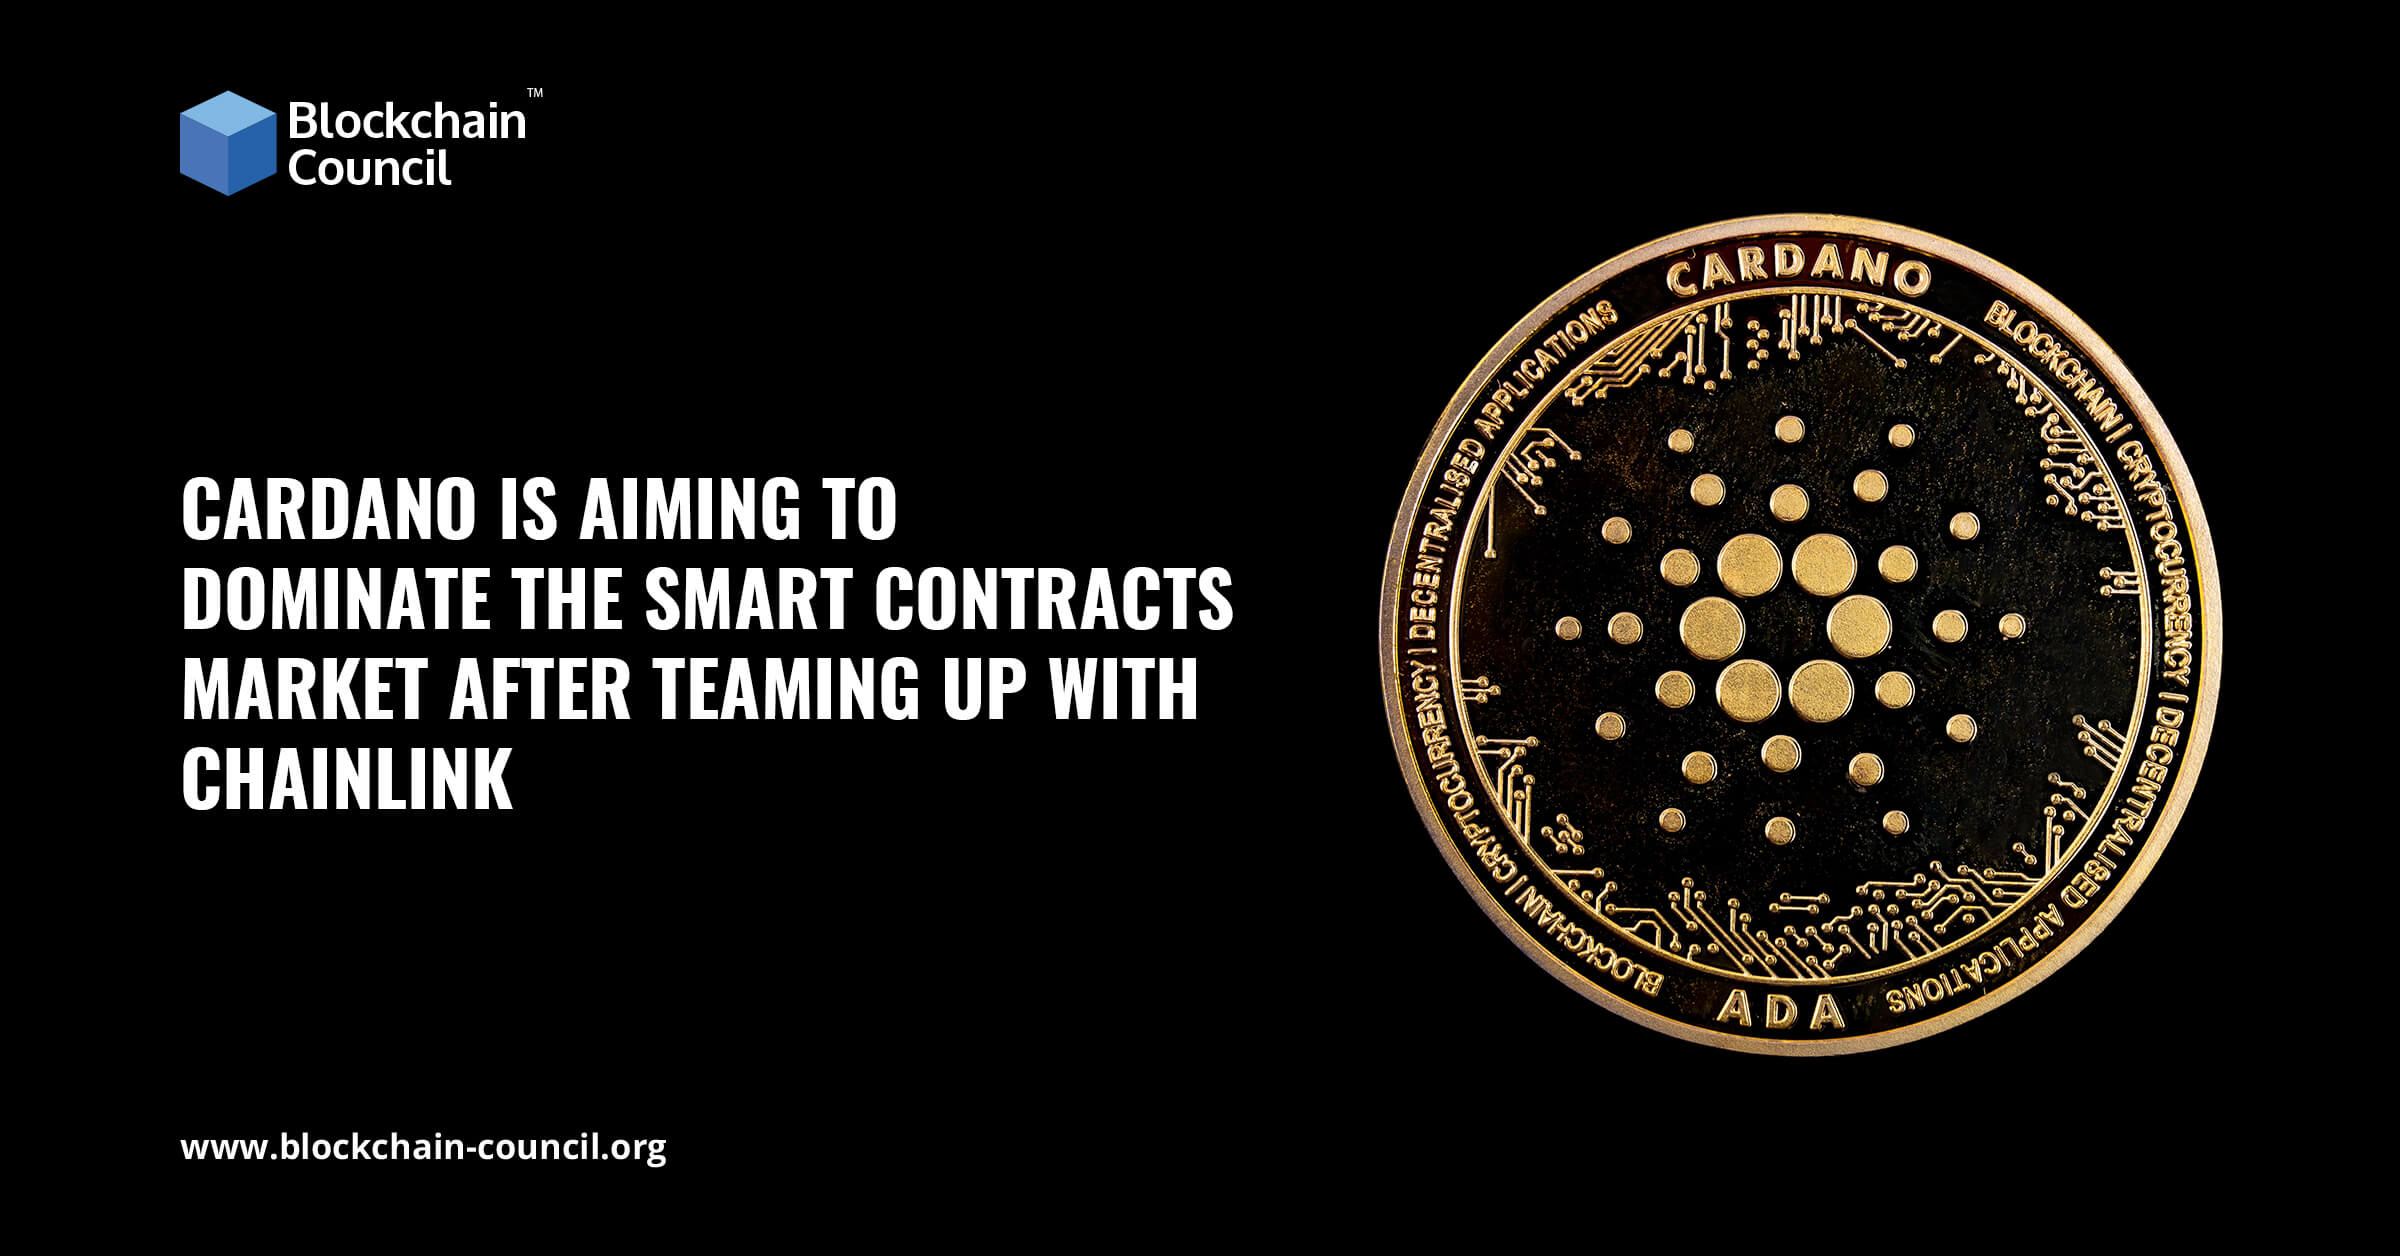 Cardano Is Aiming To Dominate The Smart Contracts Market After Teaming Up With Chainlink